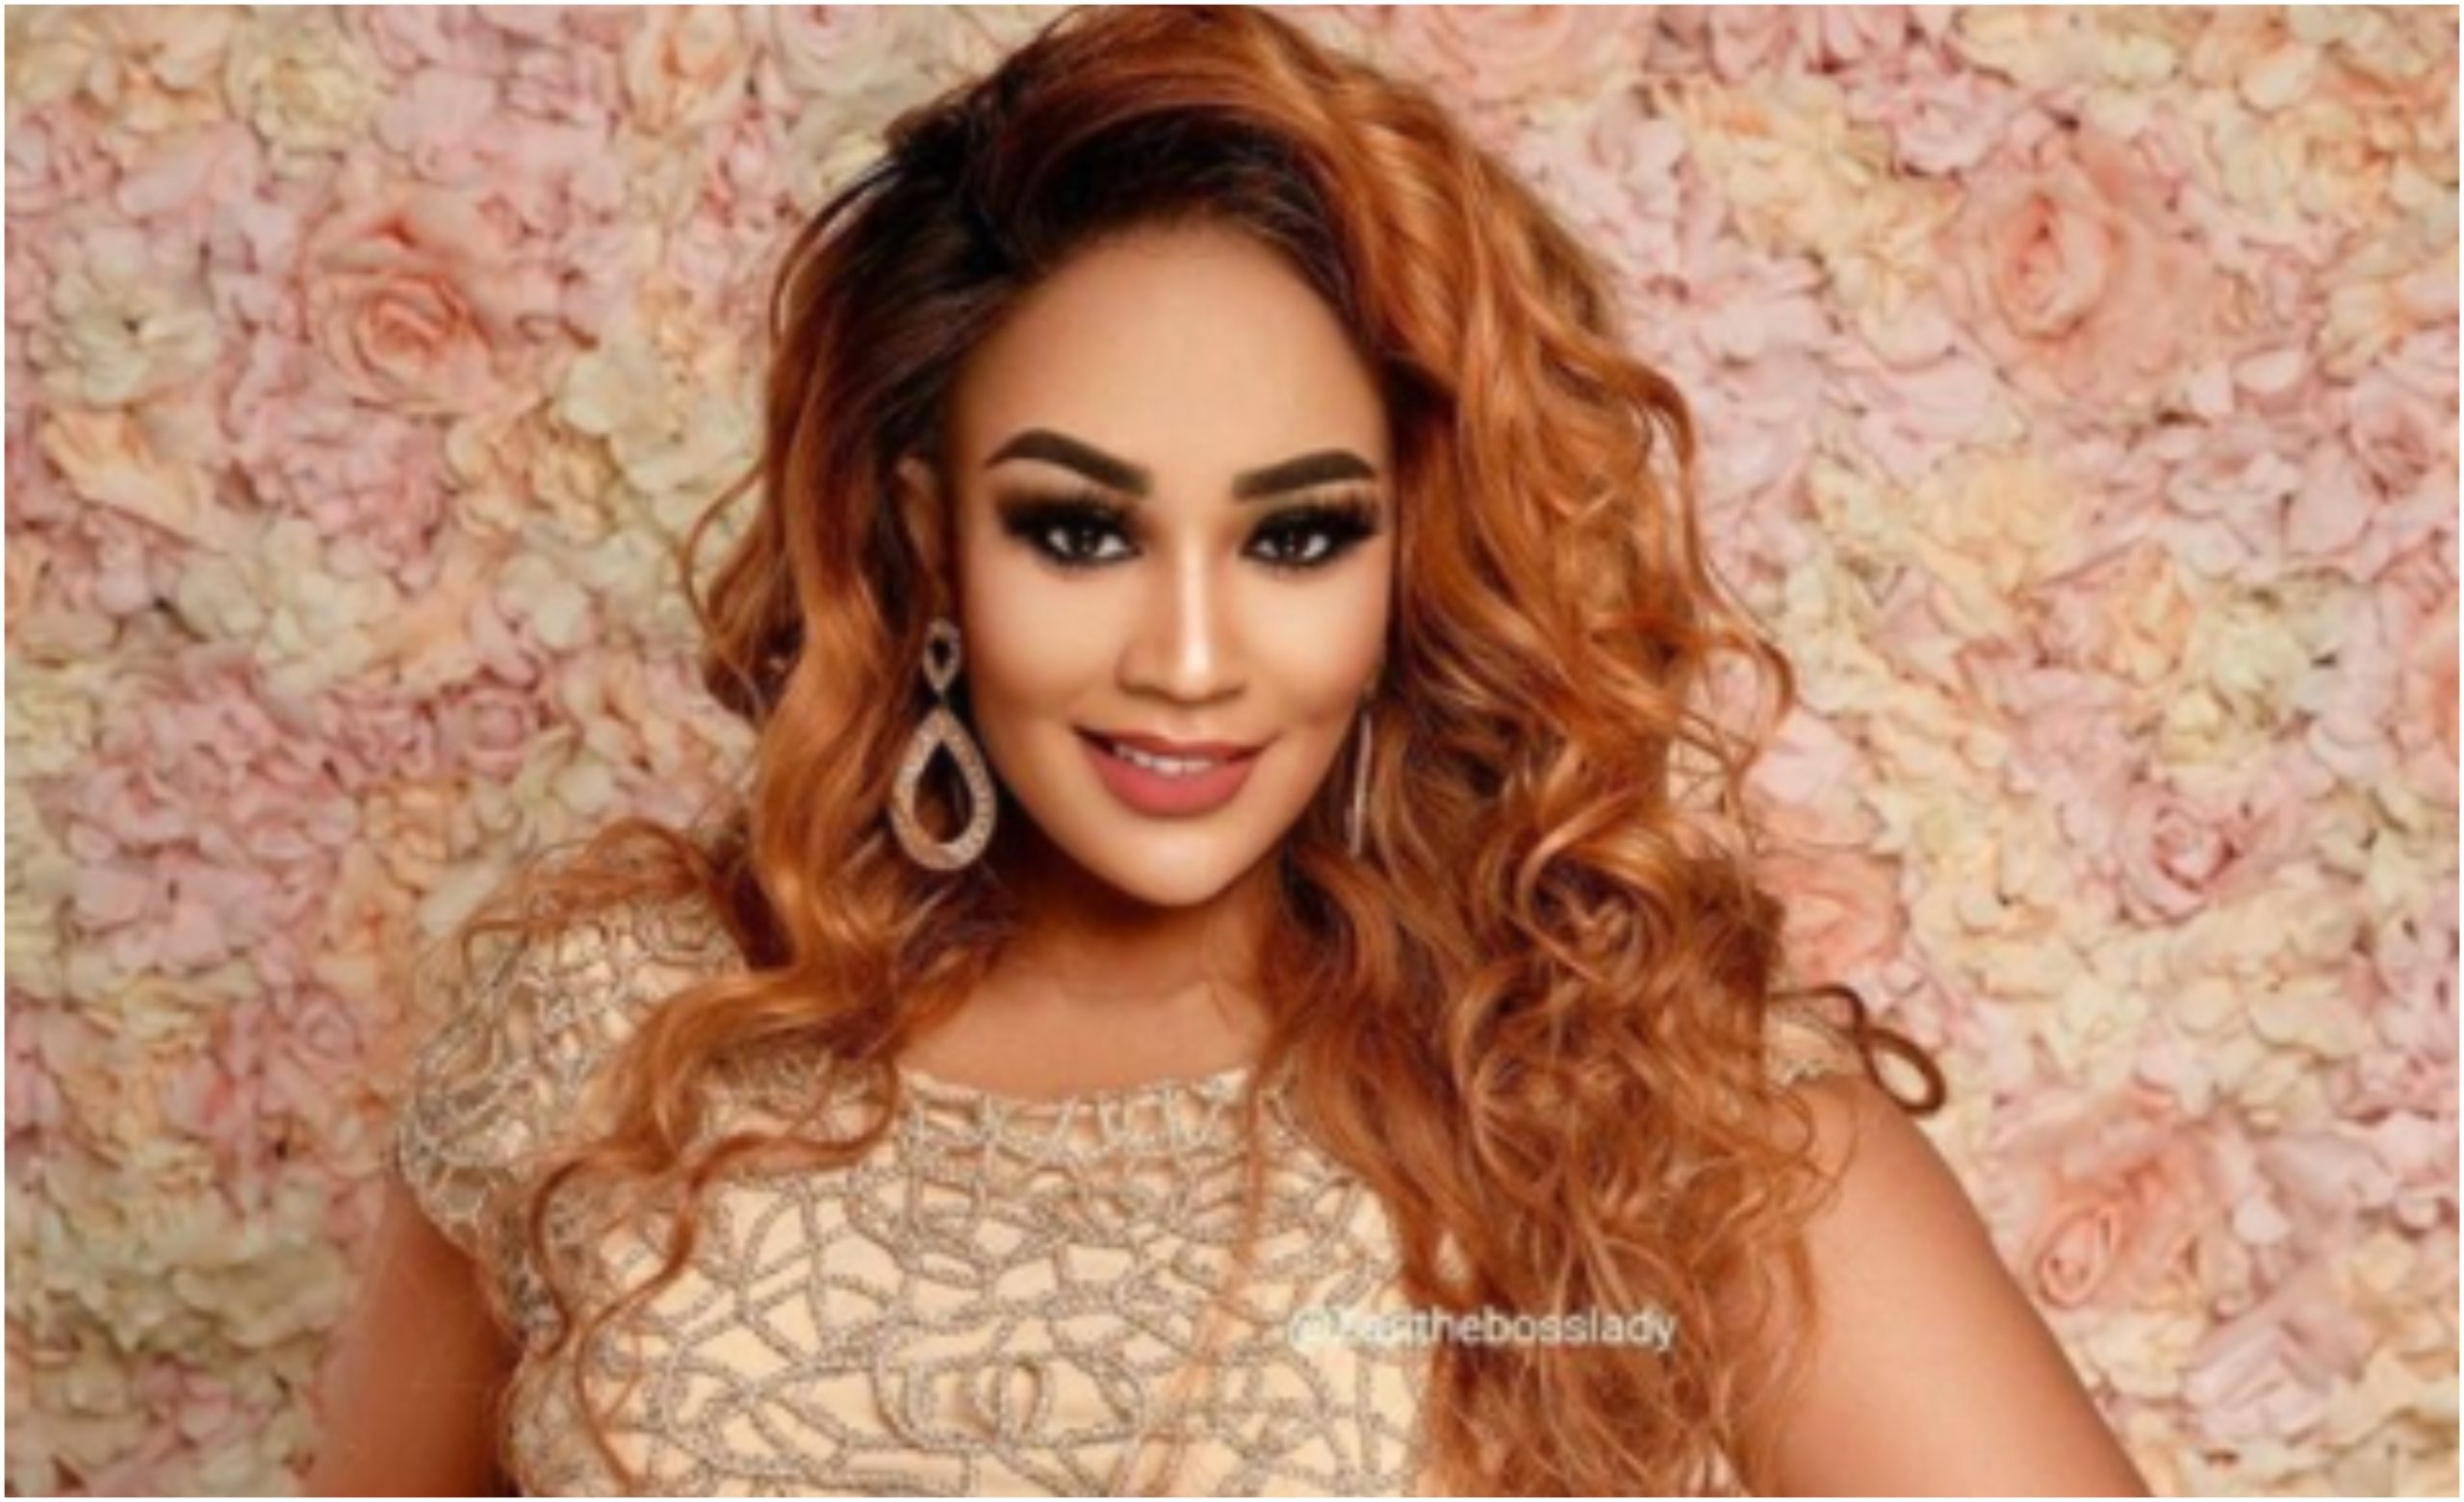 Zari Hassan’s South African reality show lands at Netflix